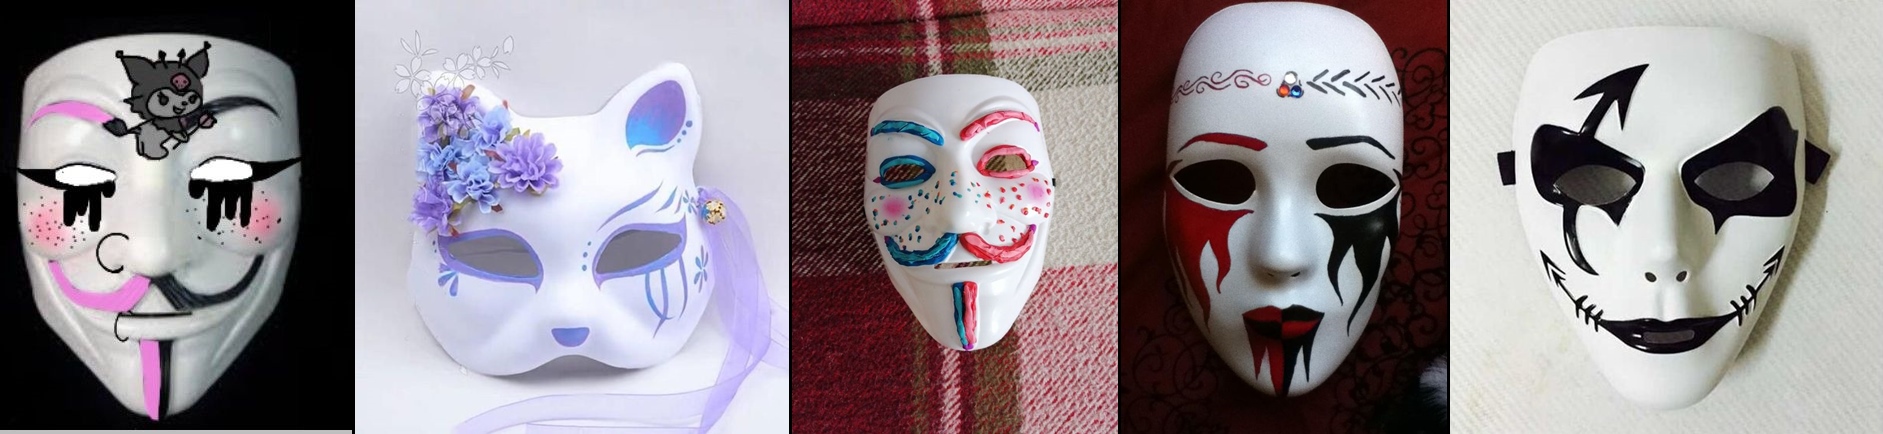 decorated anonymus masks from tiktok